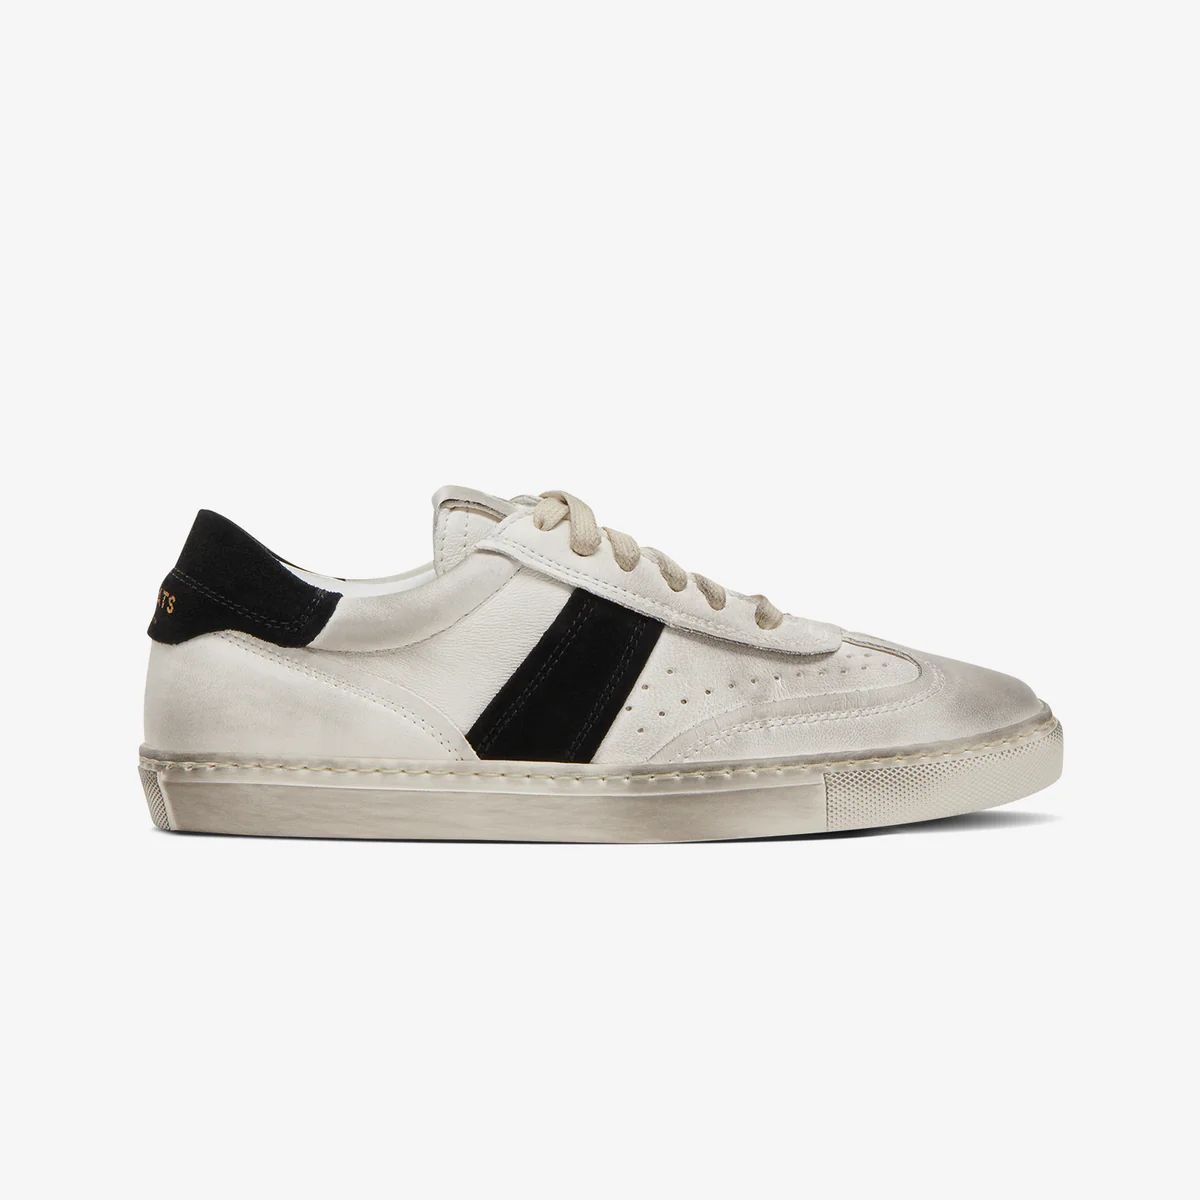 The Charlie Distressed - White/Black | Greats.com